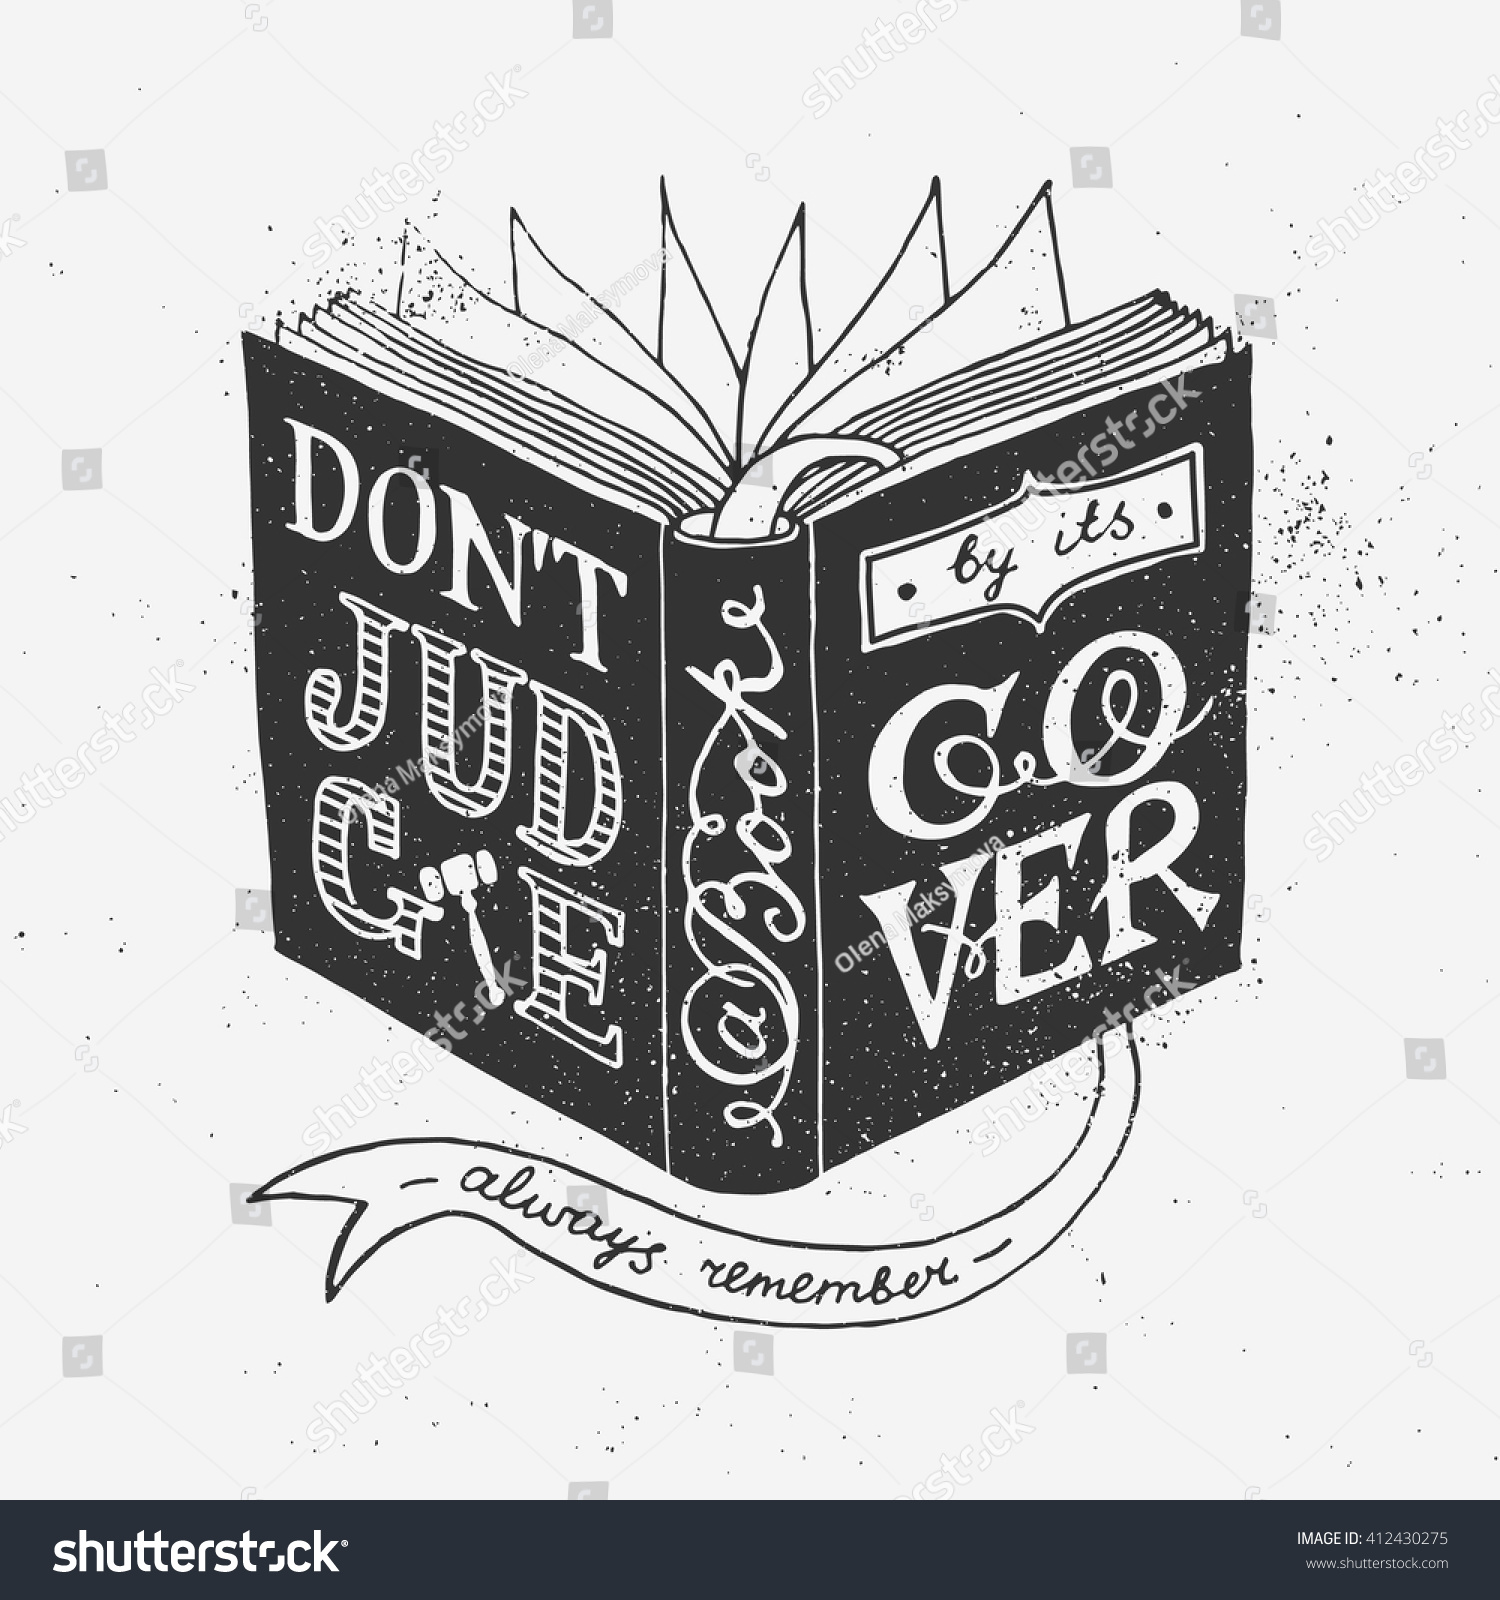 Dont Judge Book By Cover Quote Stock Vector Royalty Free 412430275 